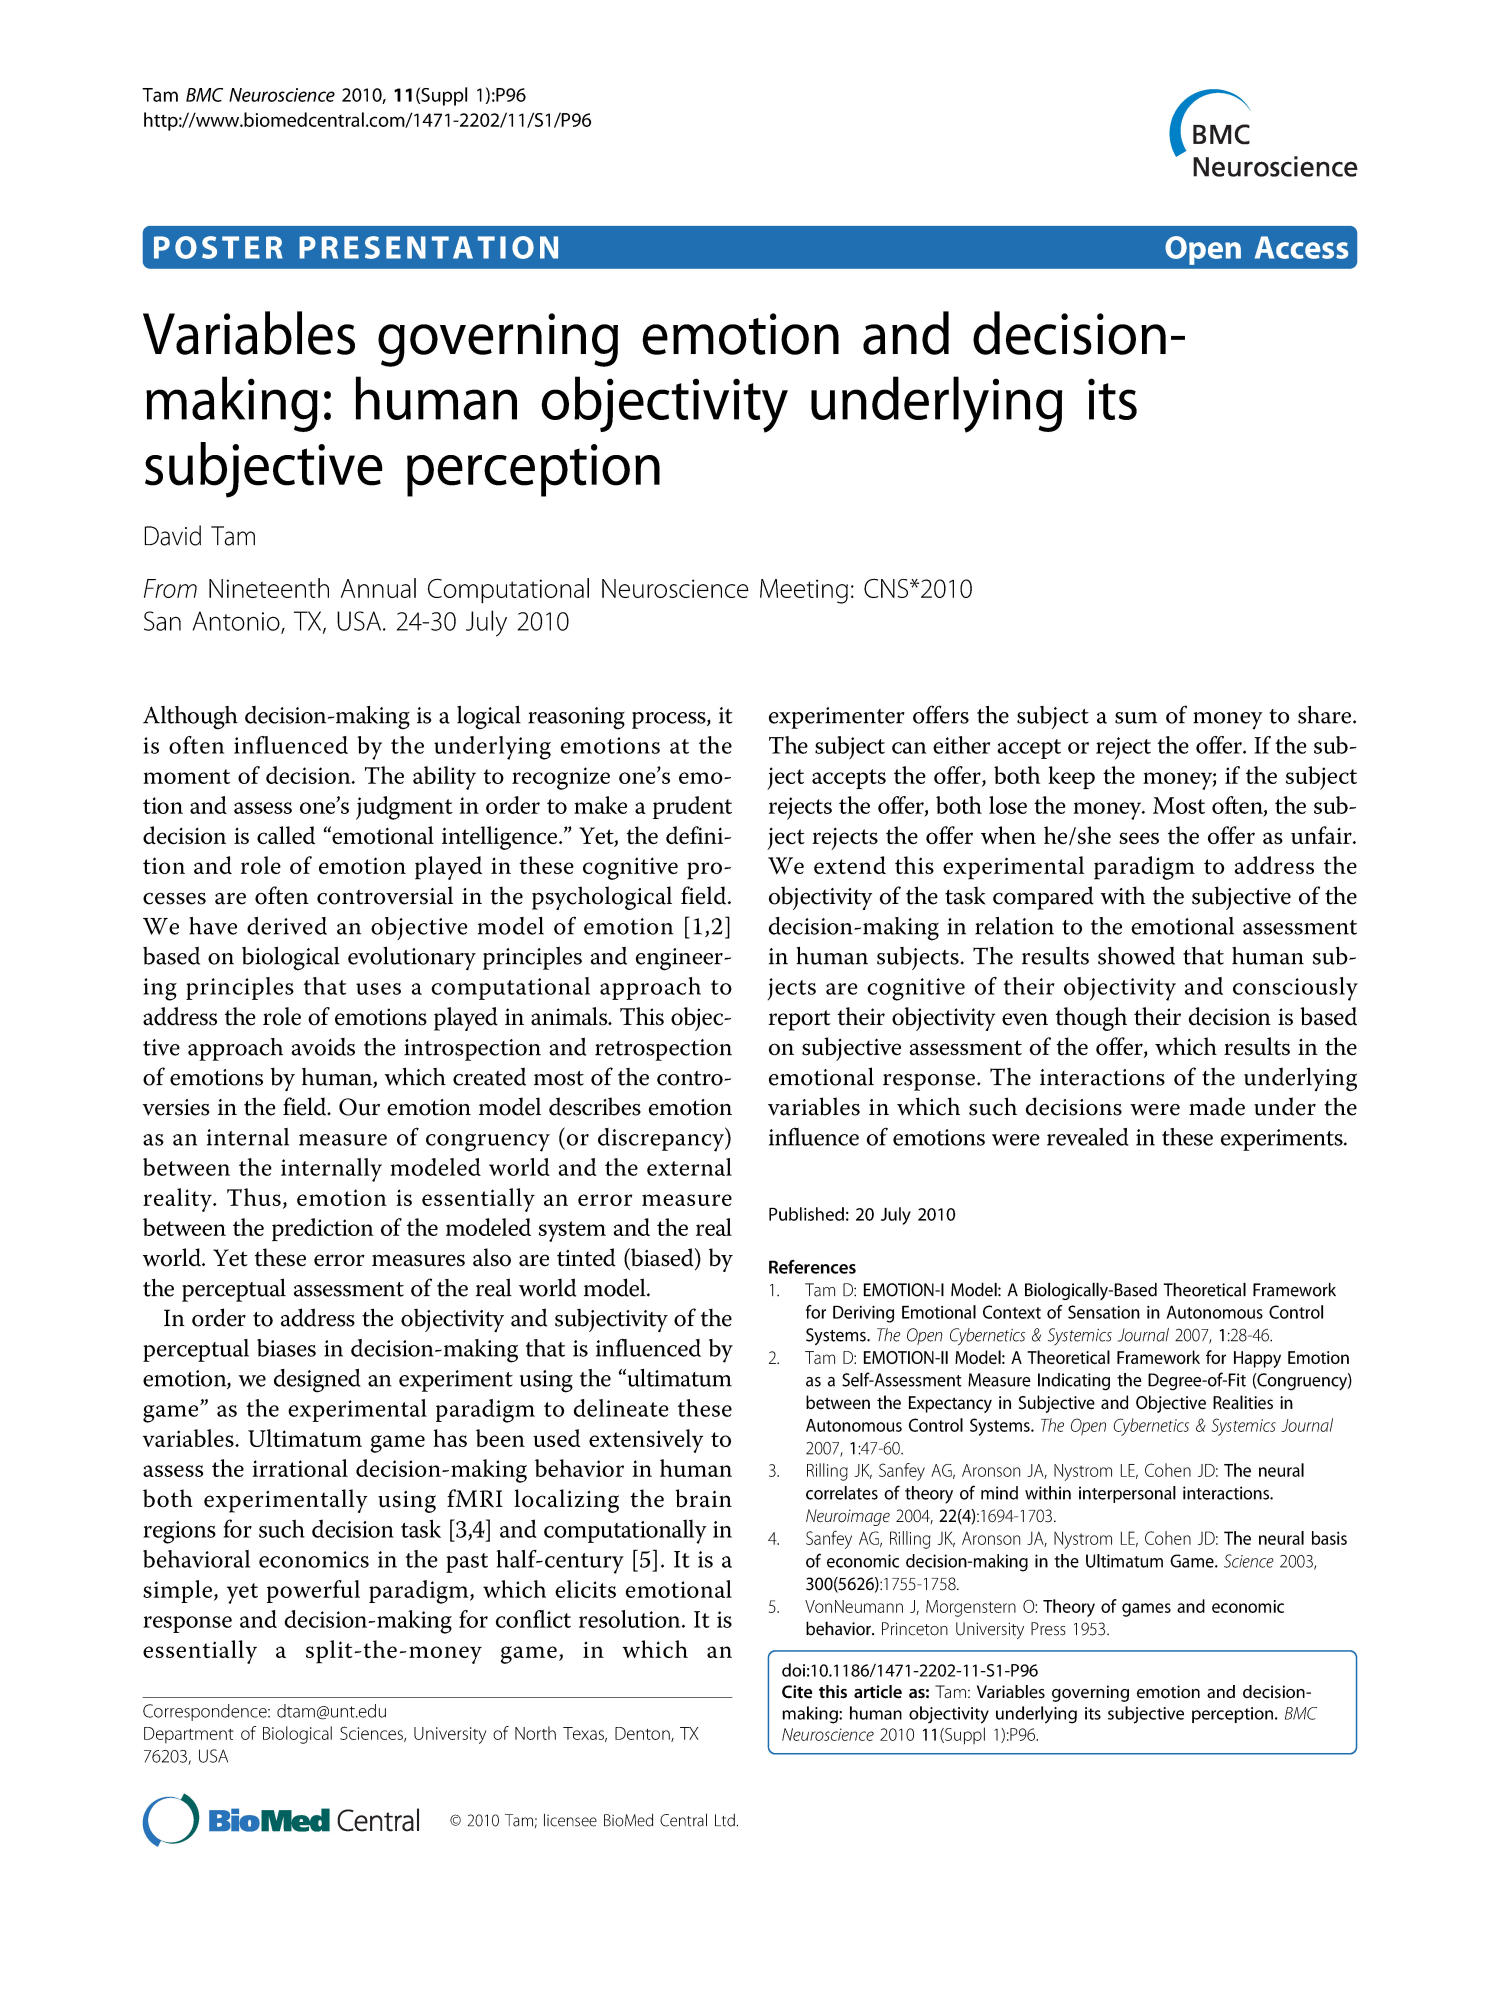 Variables governing emotion and decision-making: human objectivity underlying its subjective perception
                                                
                                                    1
                                                